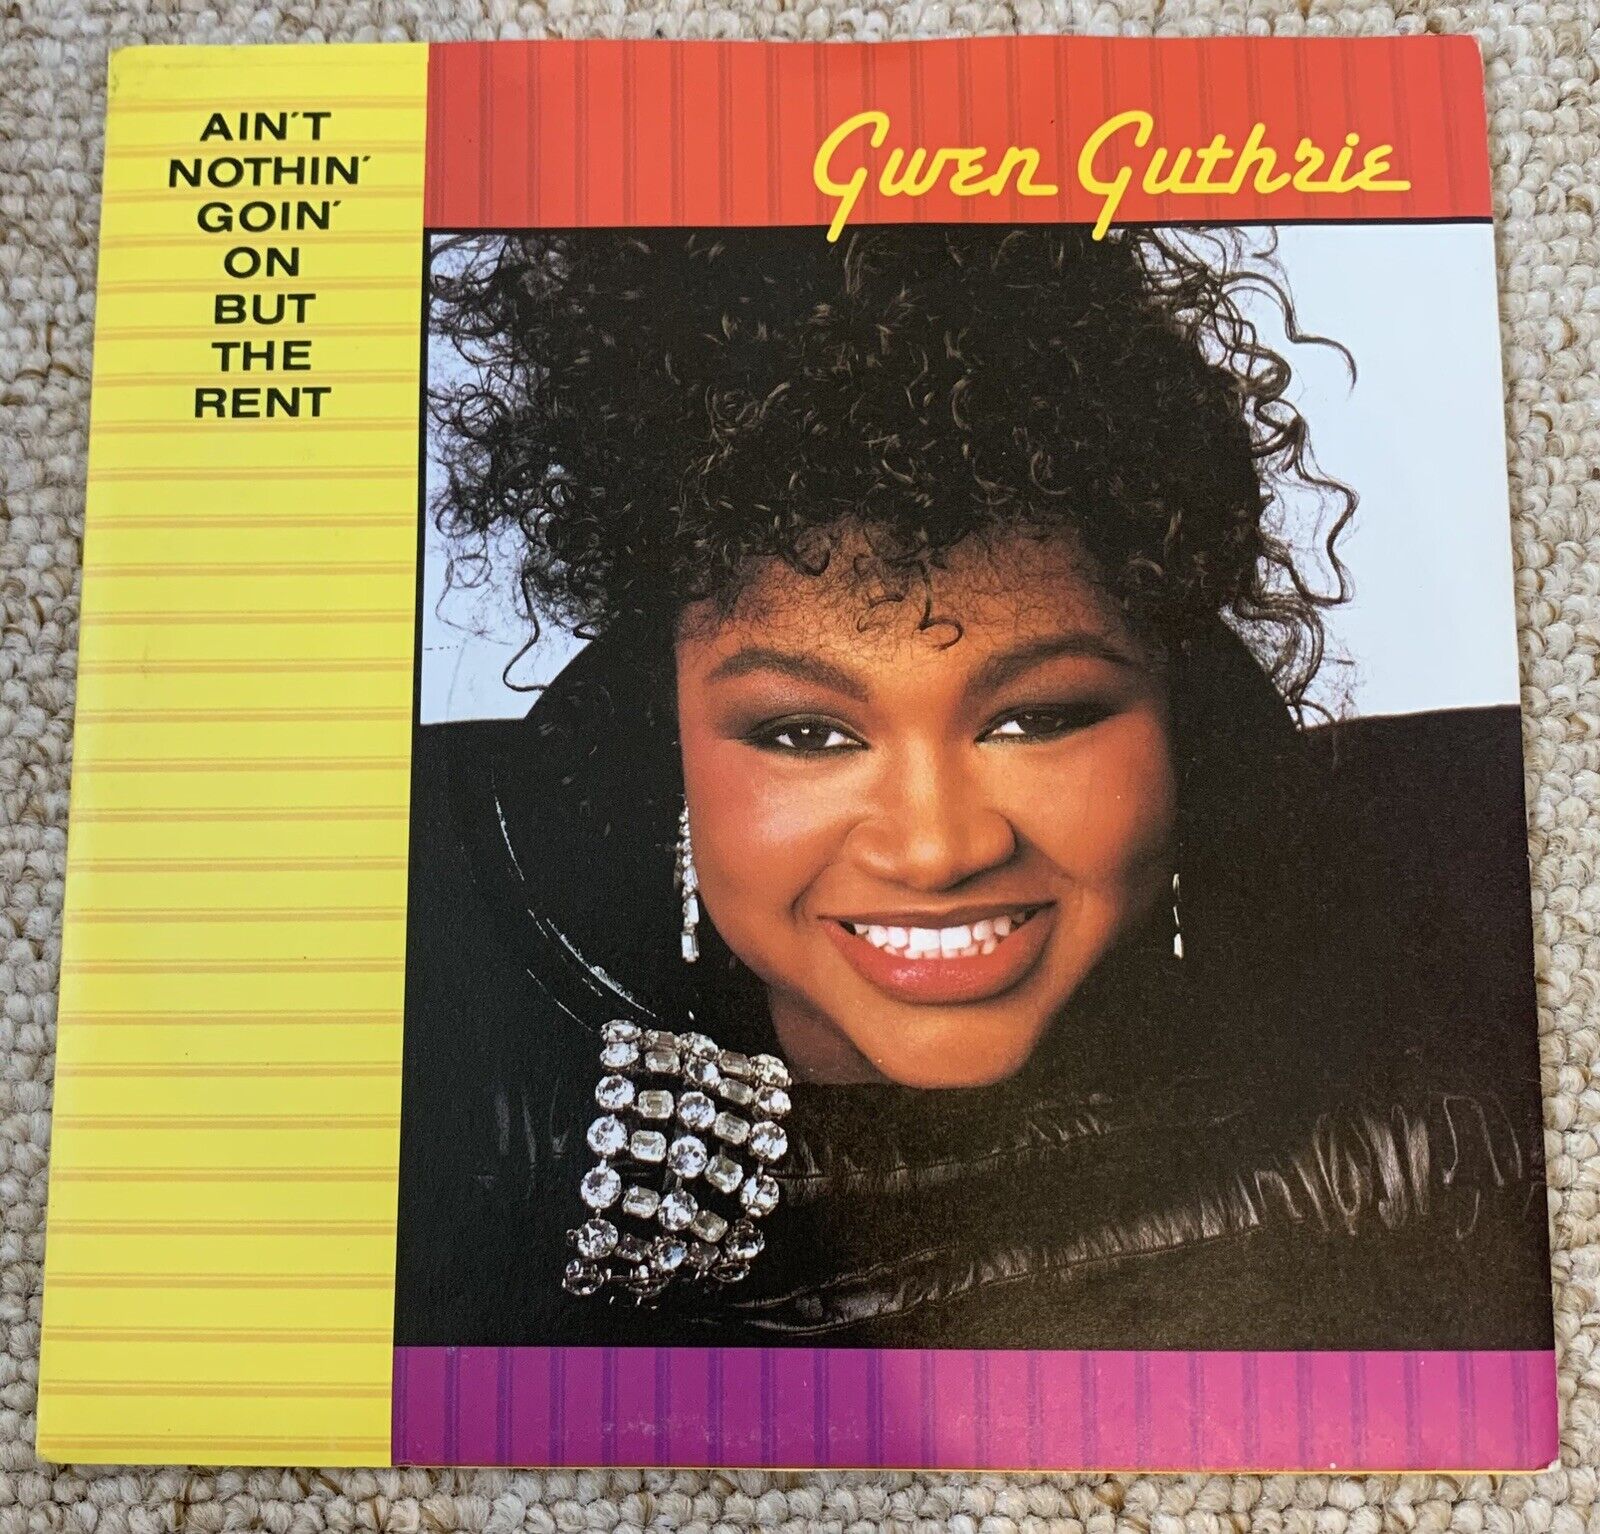 Gwen Guthrie - Ain't Nothin' Goin' On But The Rent - 41 Rooms - show 128